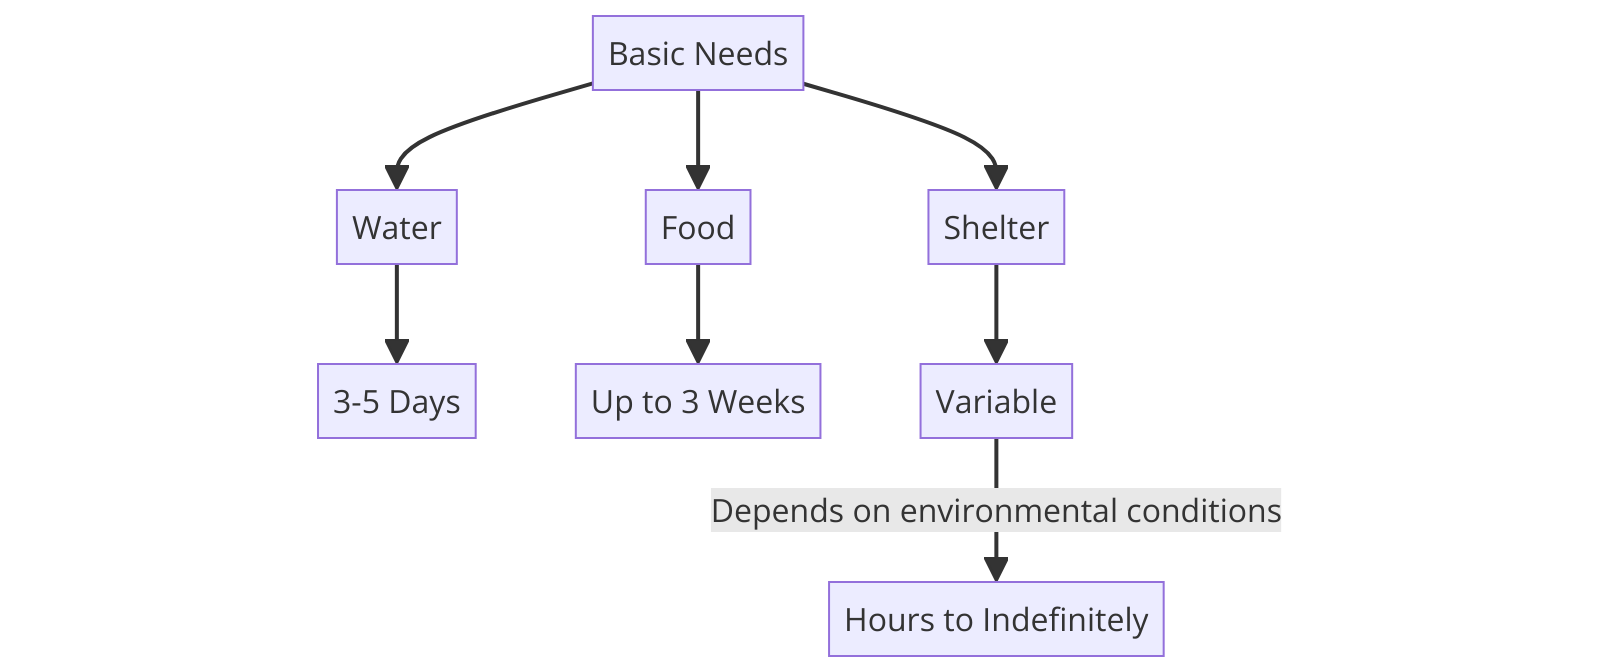 the survival time without basic needs such as water, food, and shelter